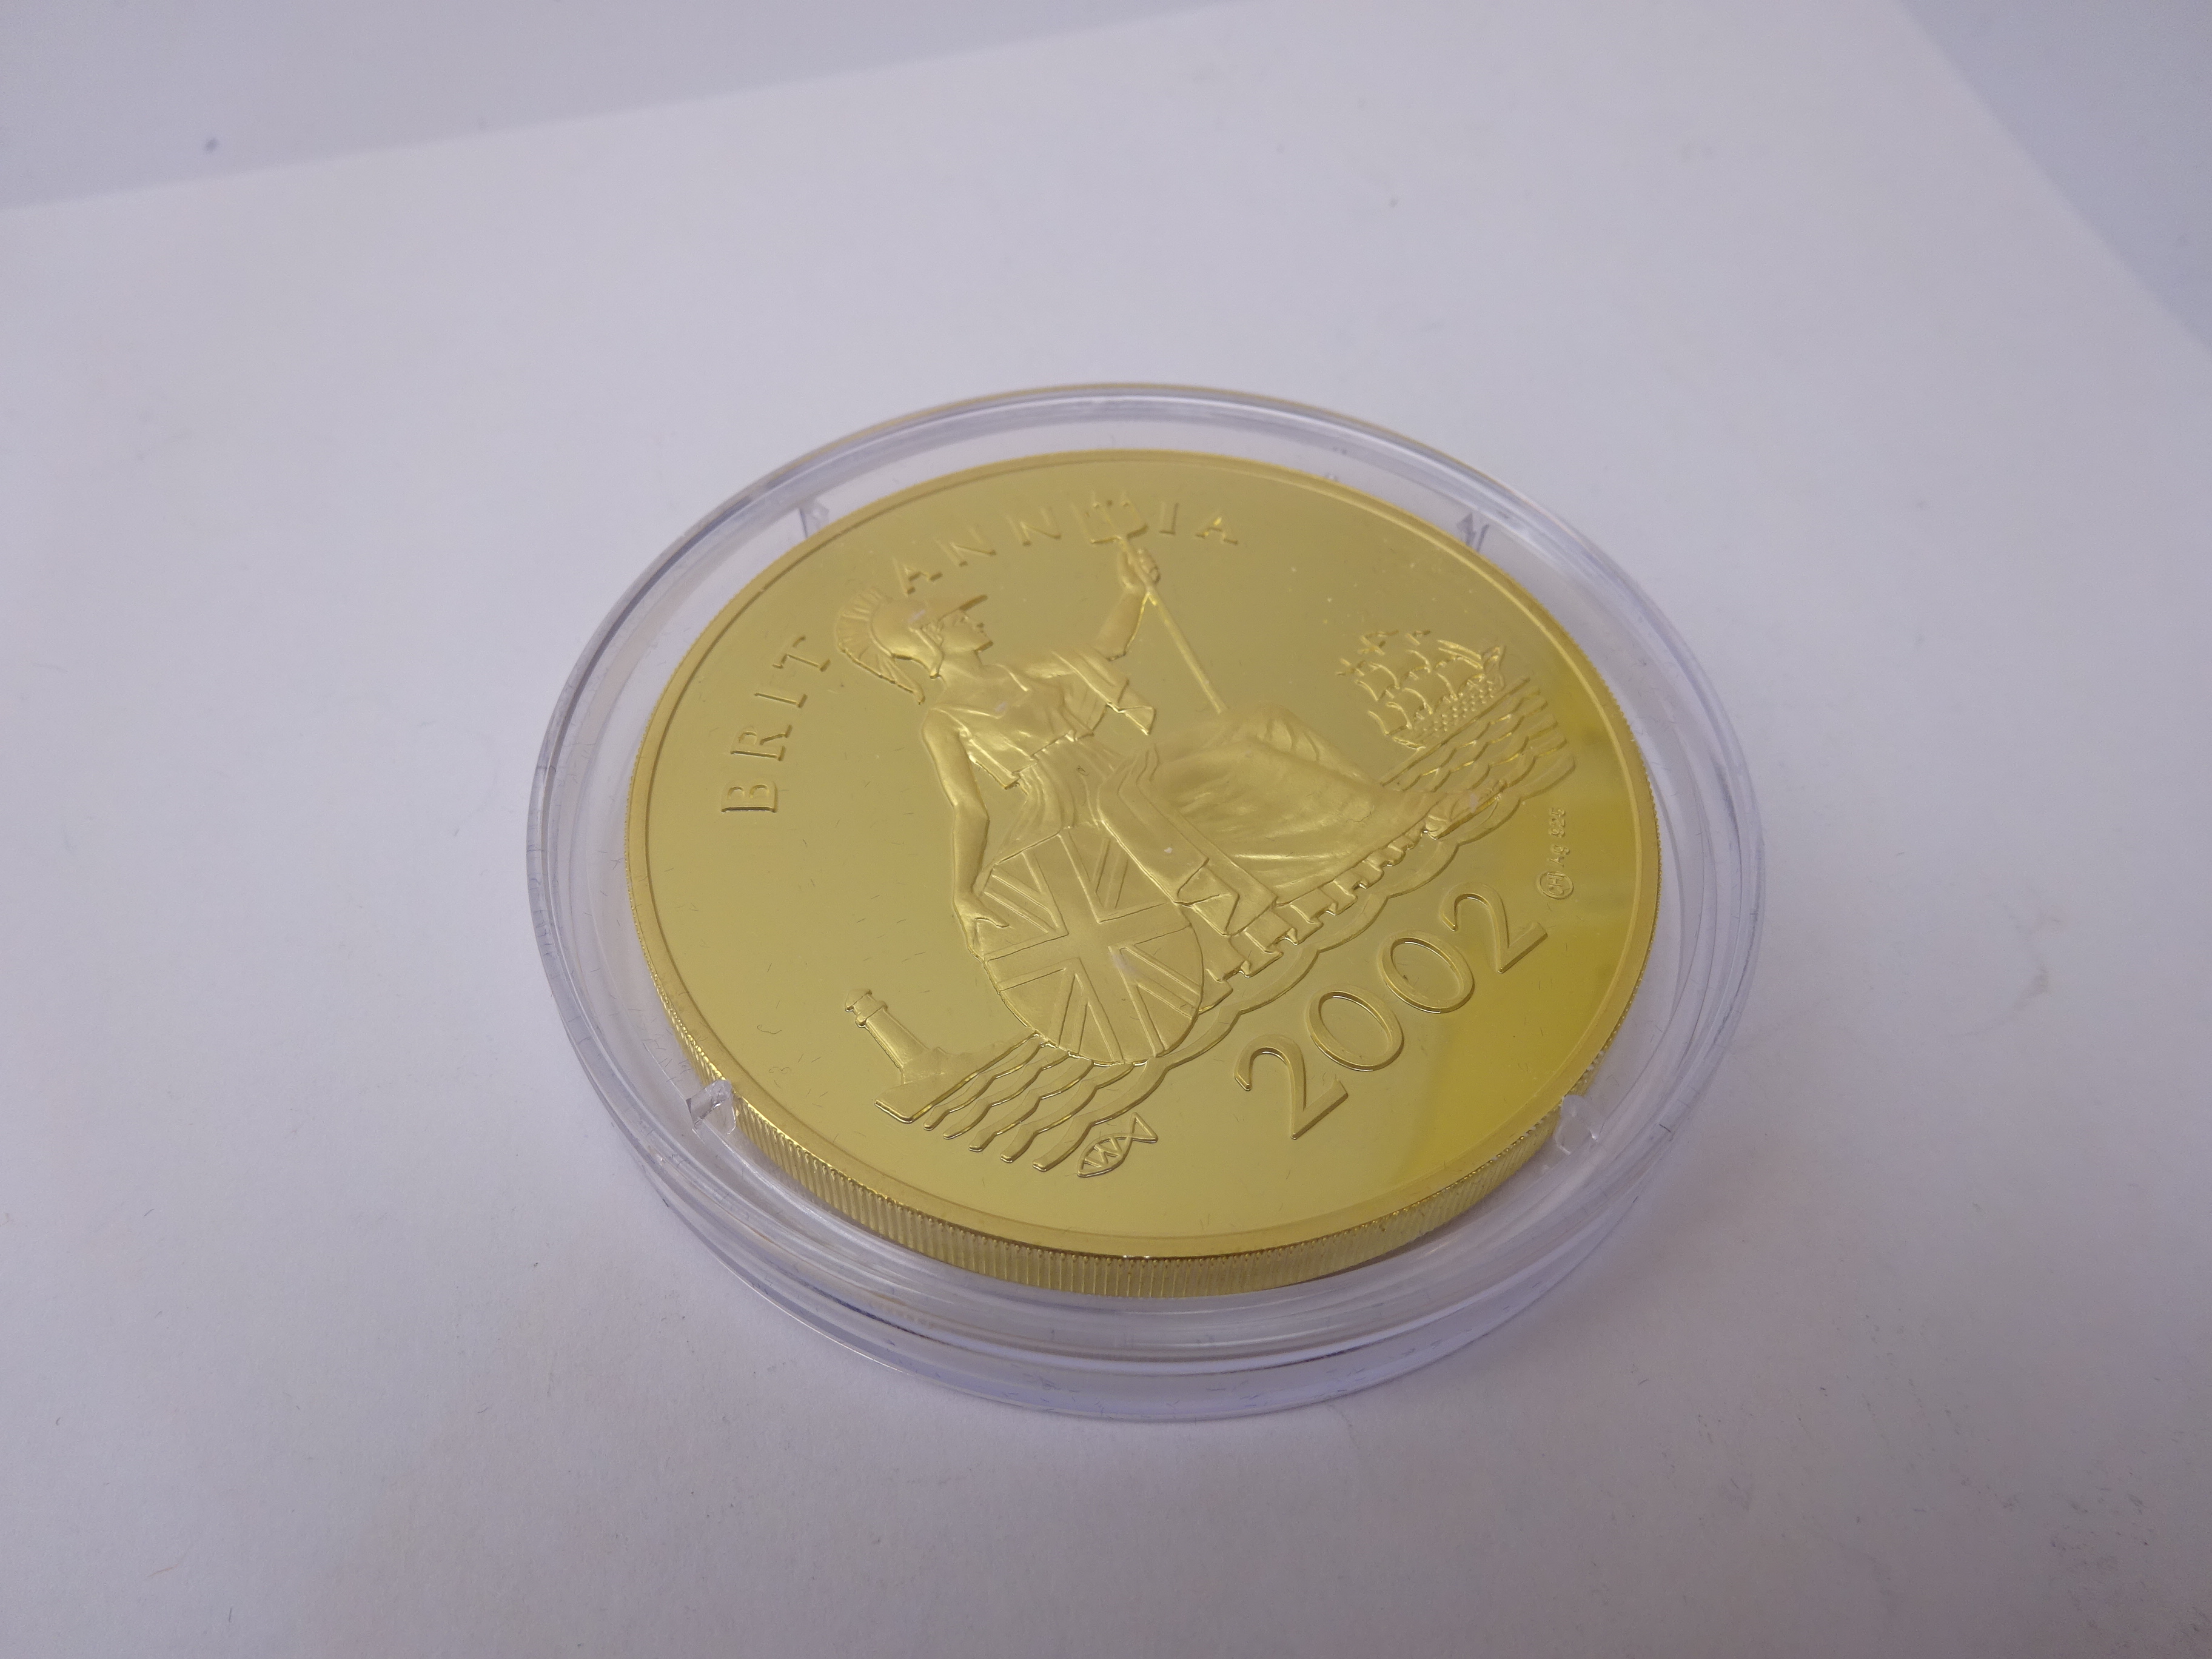 Five ounce silver coin 'The Golden Jubilee Weekend Gold Plated Silver Britannia Commemorative' - Image 3 of 3